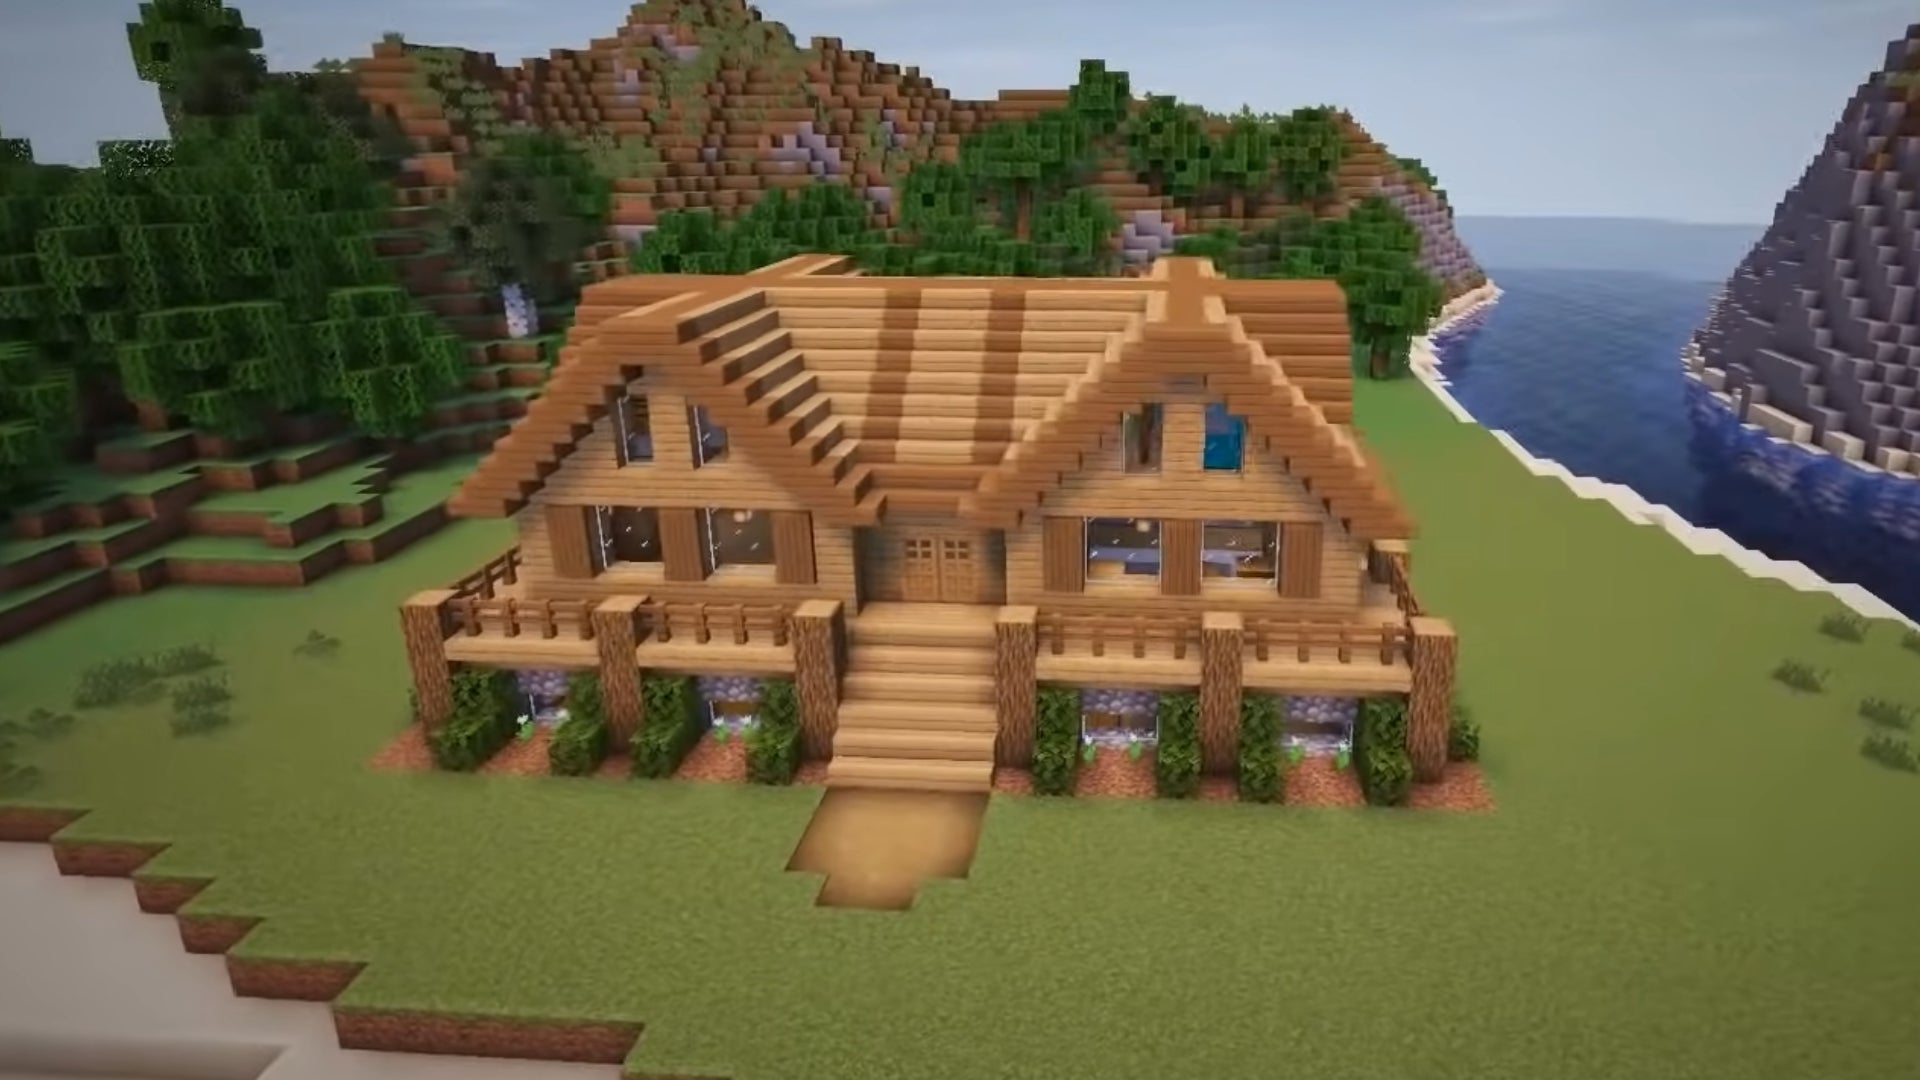 A wooden cabin in Minecraft, built by YouTuber Greg Builds.